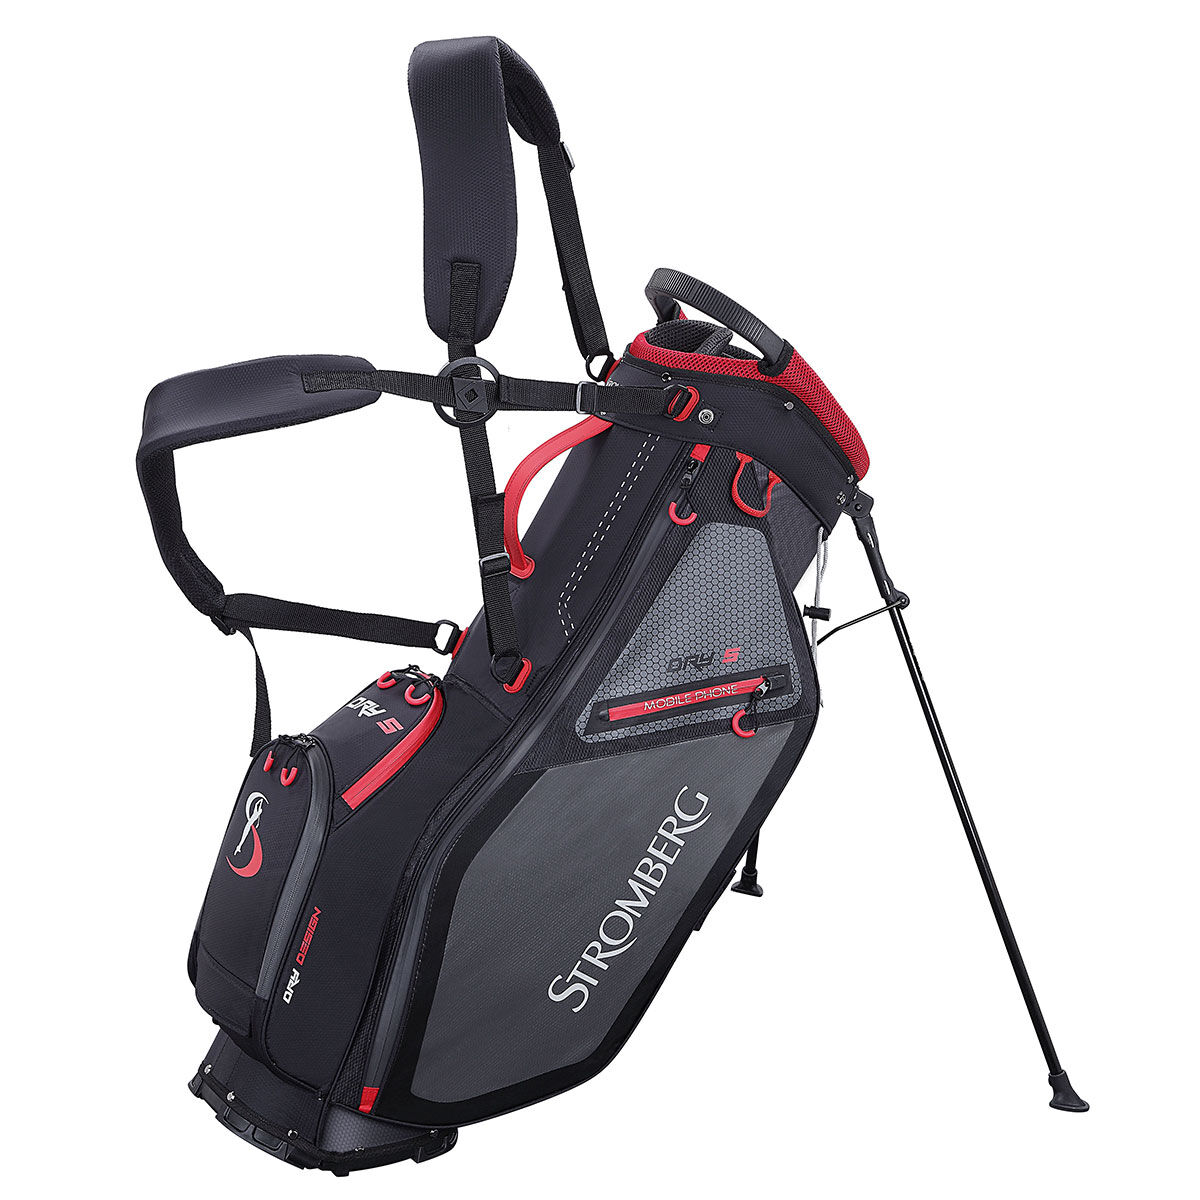 Stromberg Dry S Lightweight Golf Stand Bag from american golf